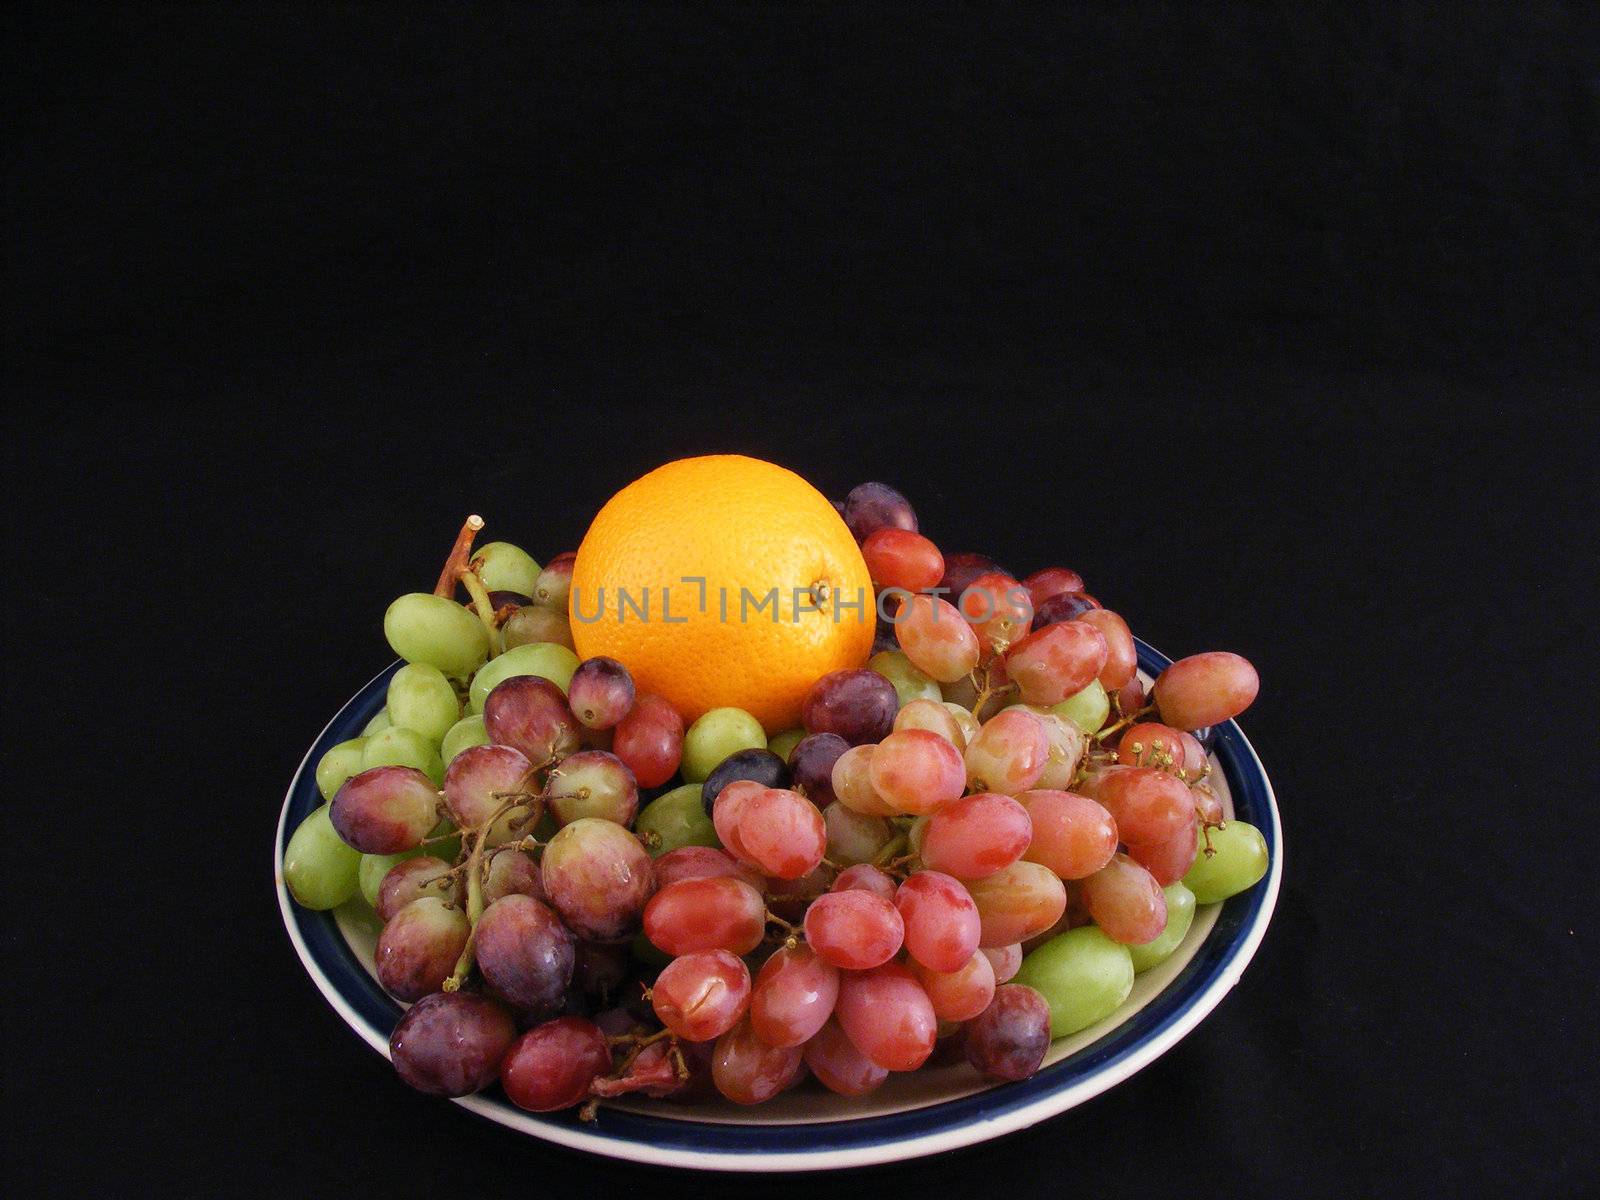 An orange nestled in a bed of grapes.